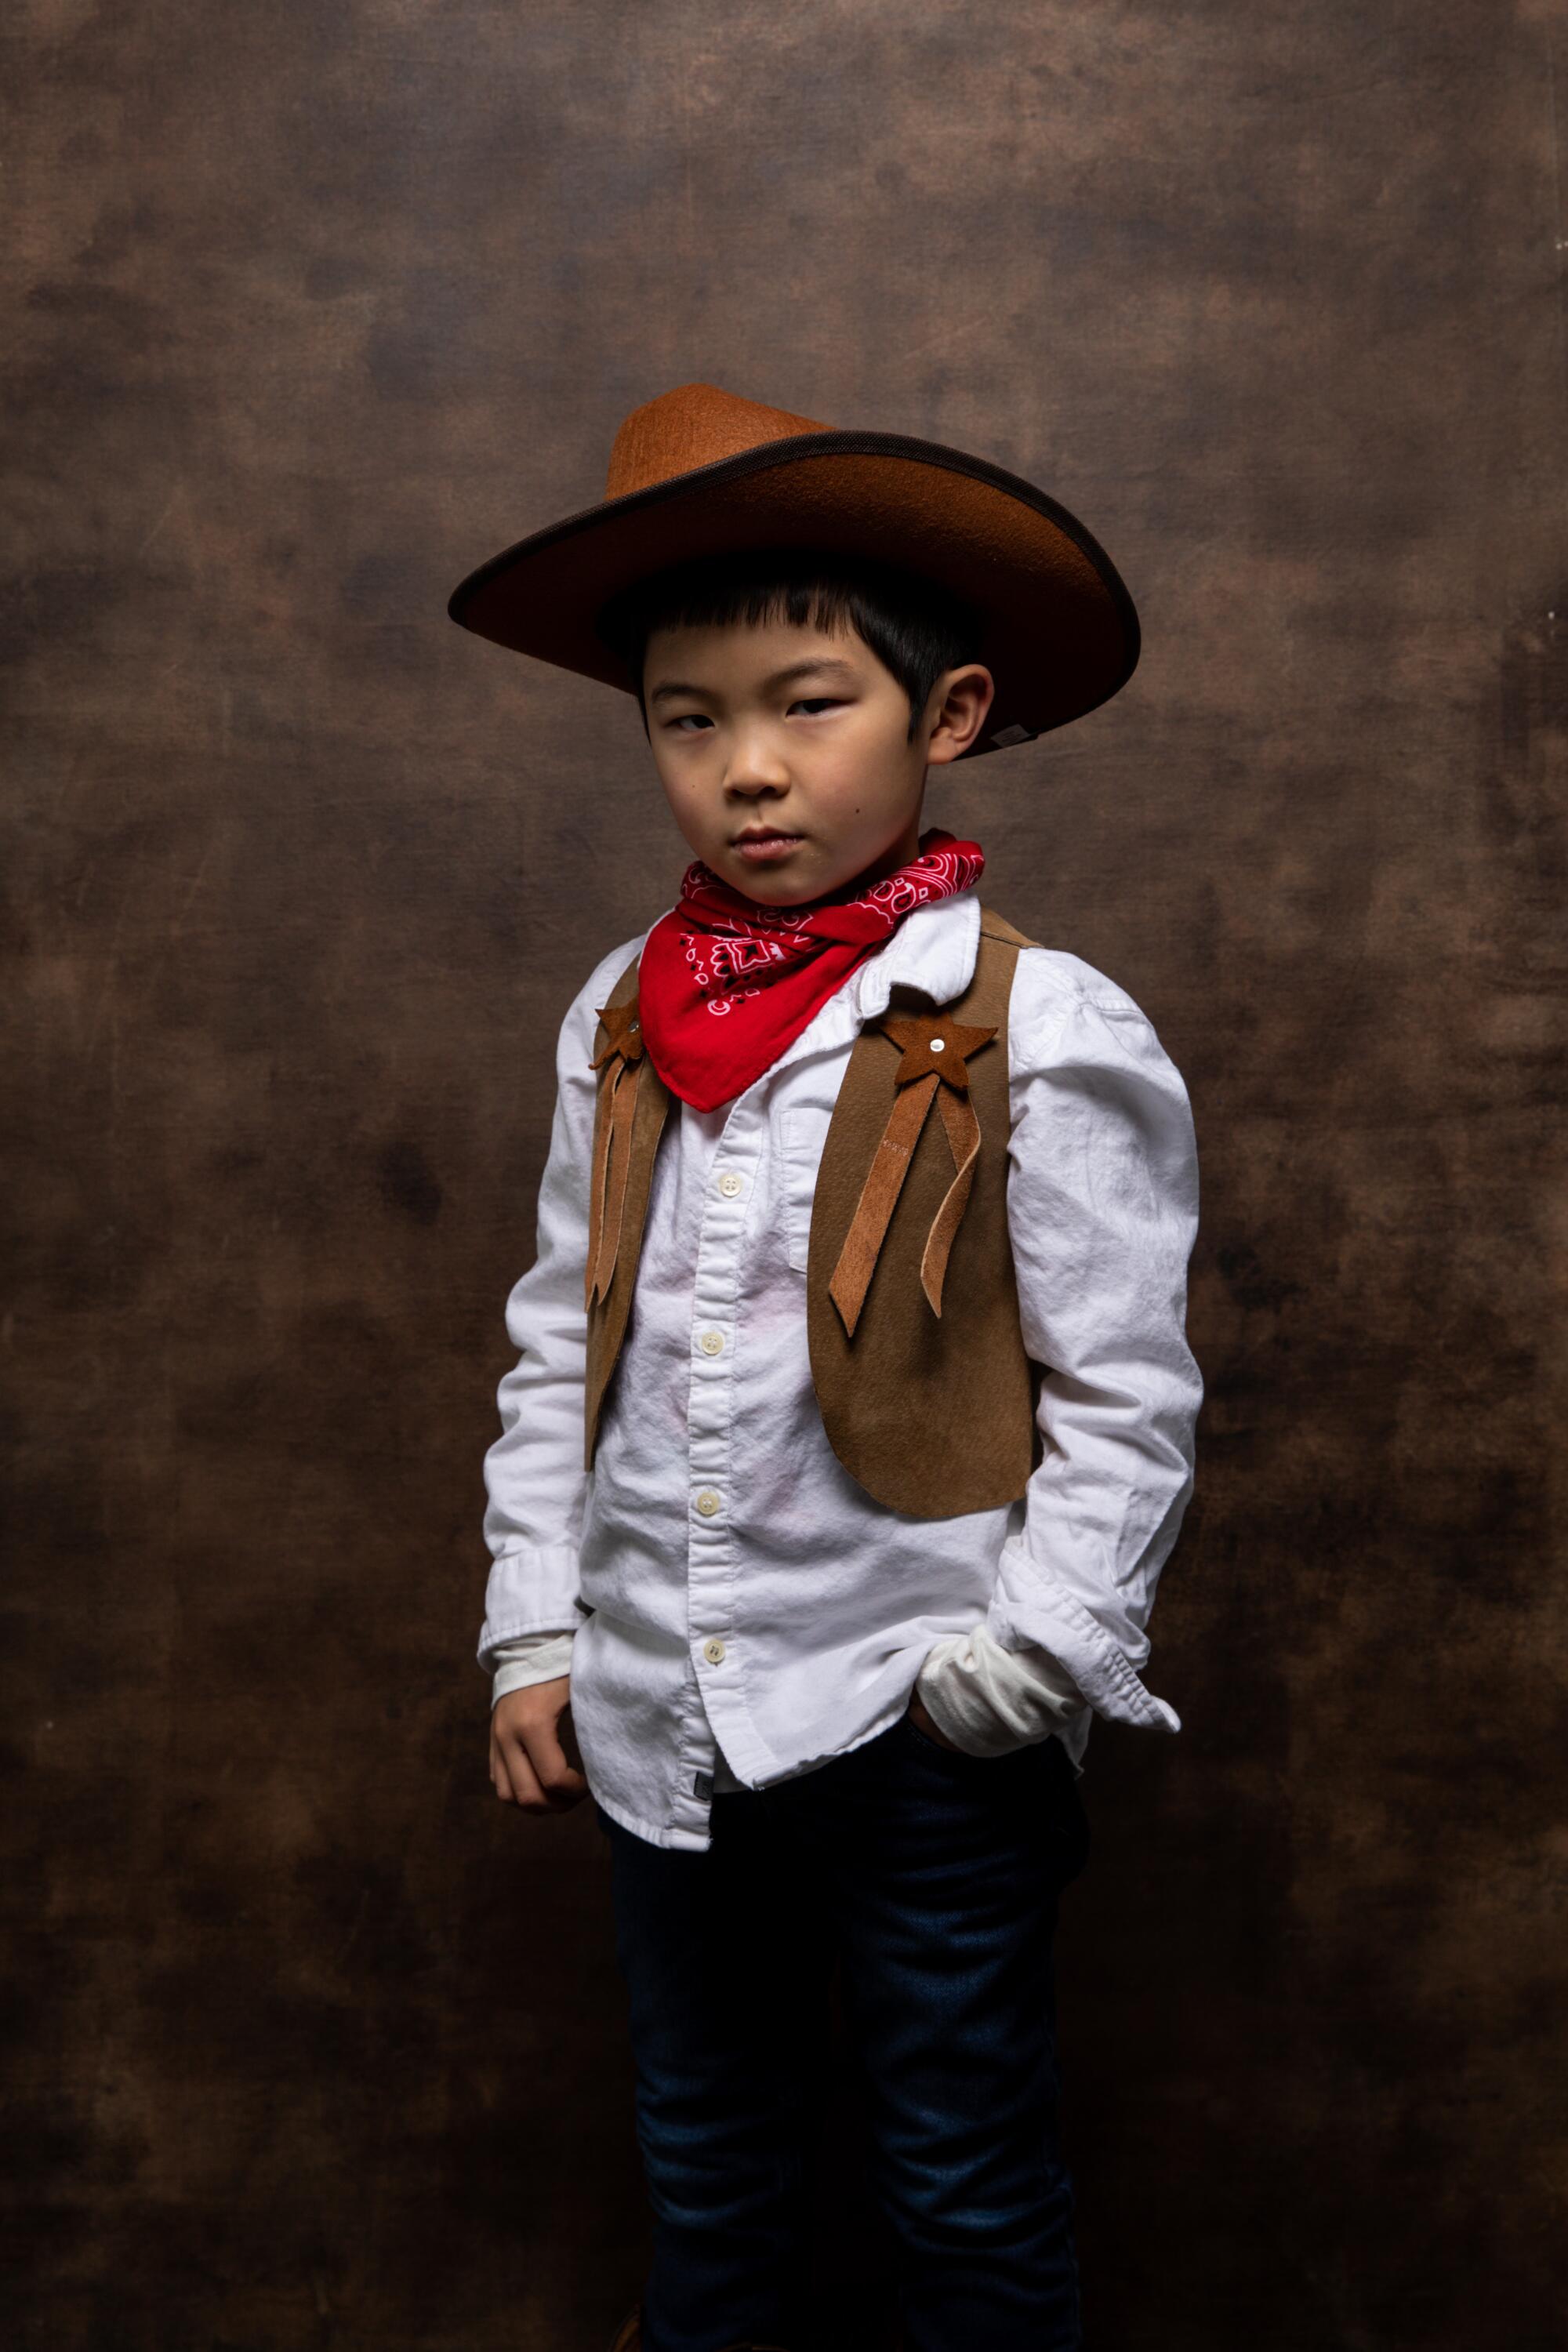 Alan Kim, in a cowboy costume, stands sideways, projecting some movie-western realness.